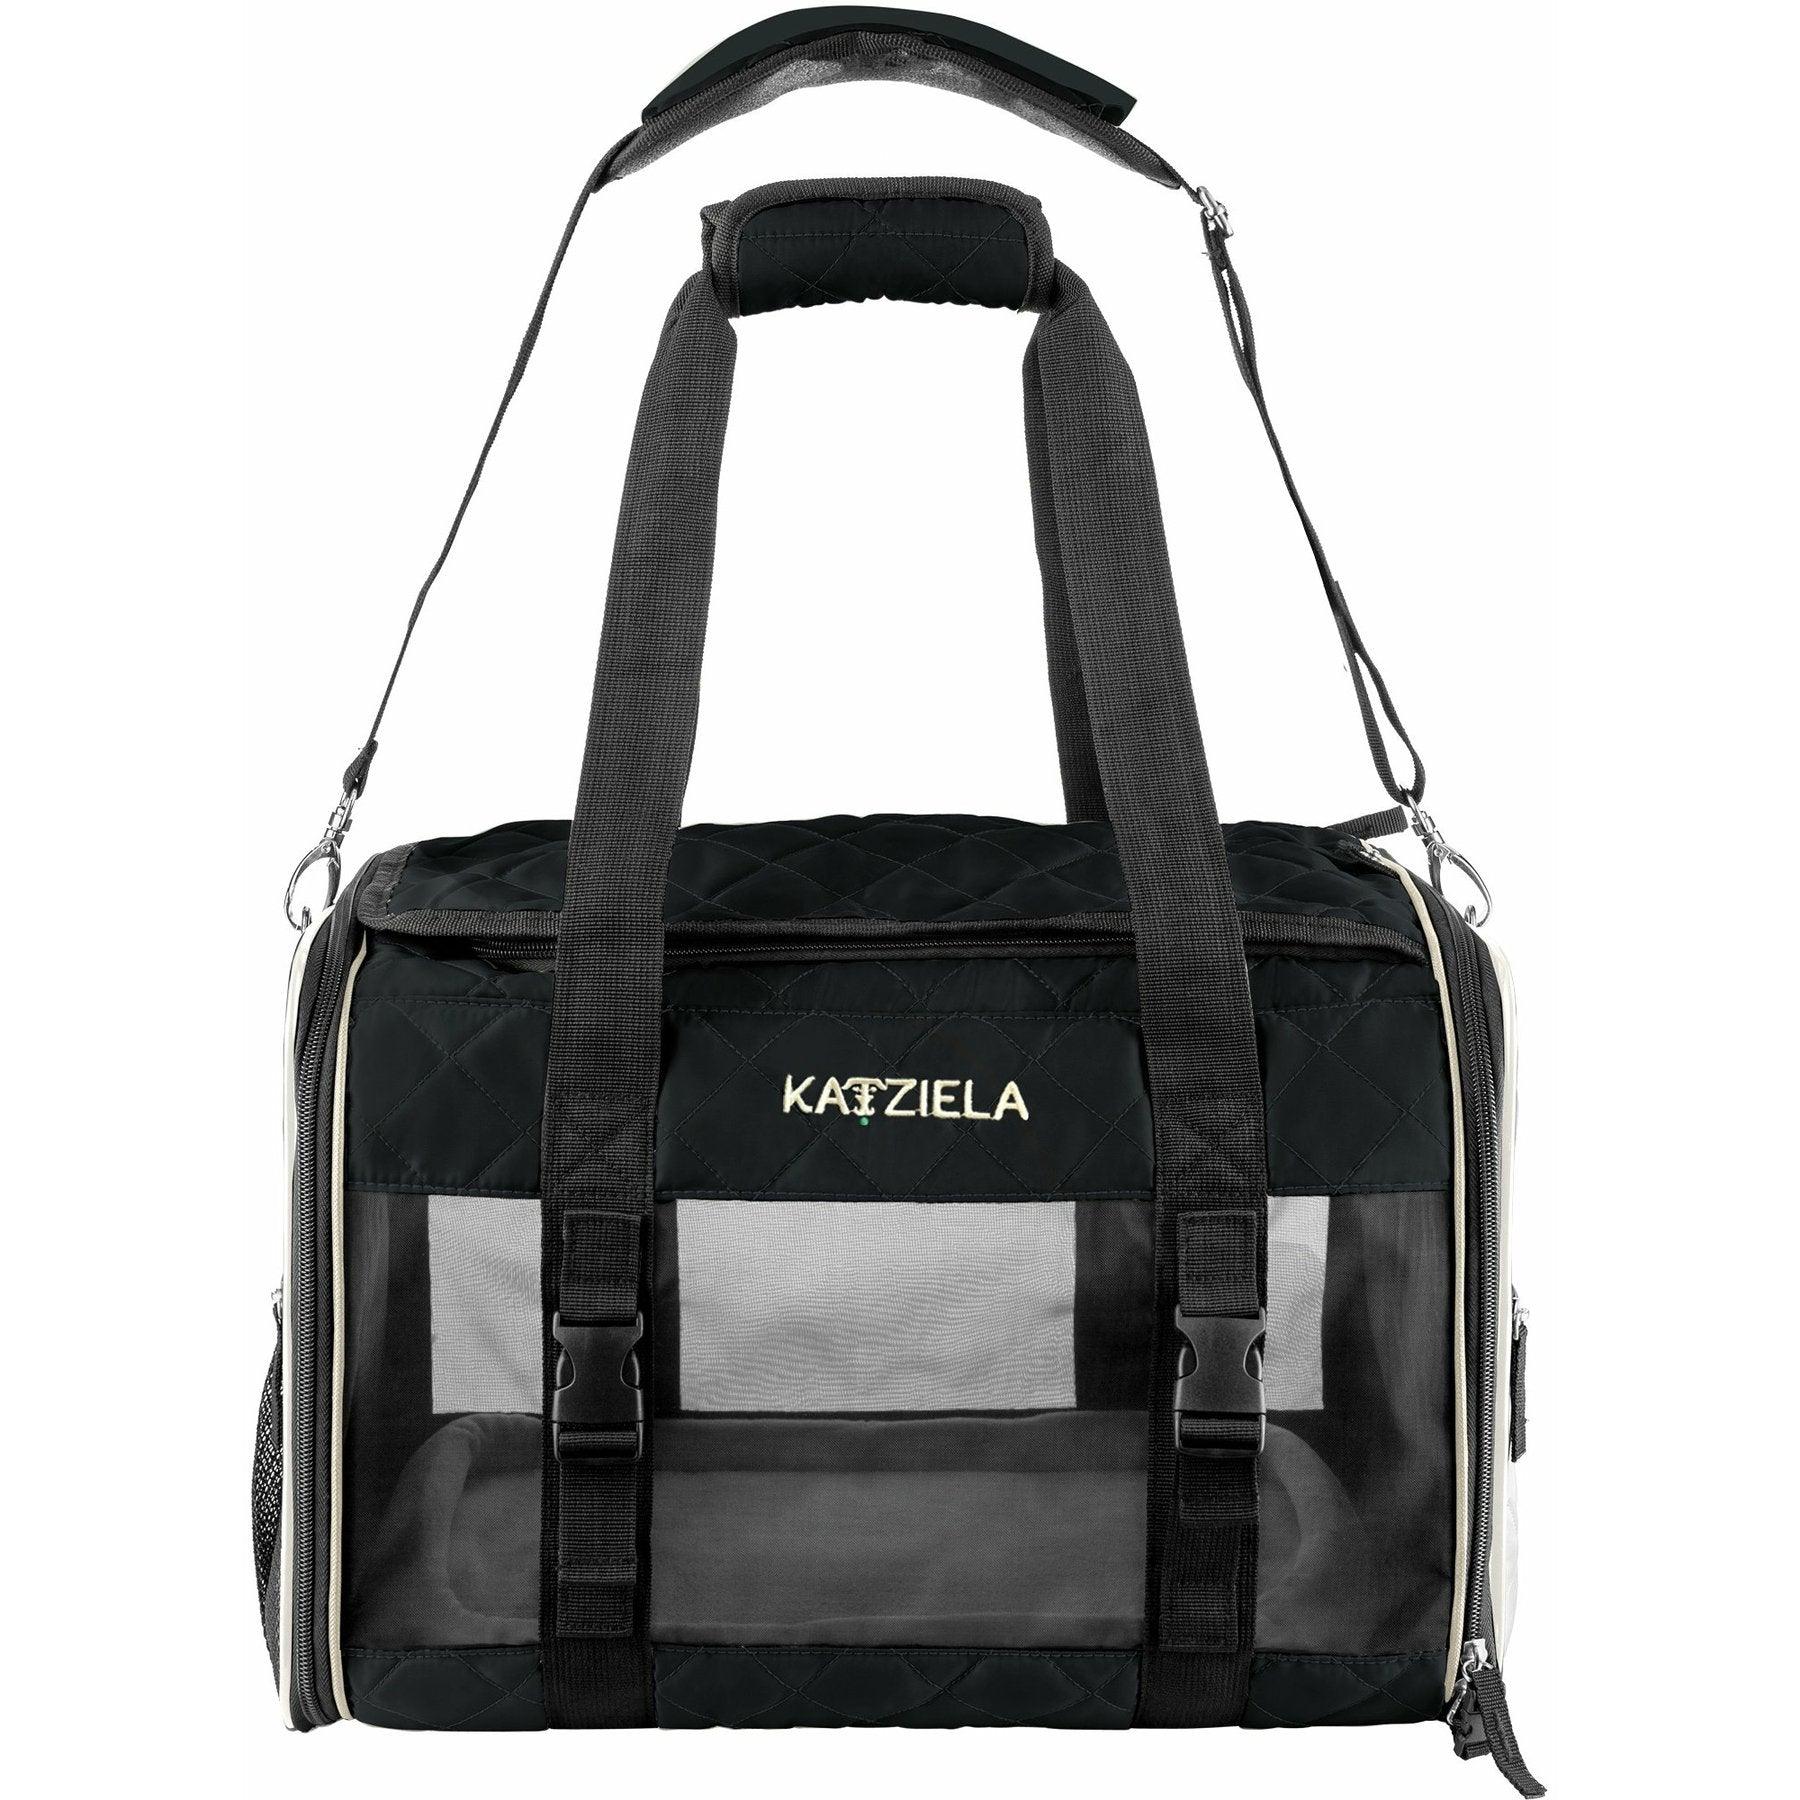 Katziela Rolling Pet Carrier Airline Approved – Pet Carrier with Wheels –  Luxury Lorry – Deluxe TSA Approved Cat Carrier with Wheels – Small Airline  Approved Dog Carrier Trolley – Plane Carry On Bag –